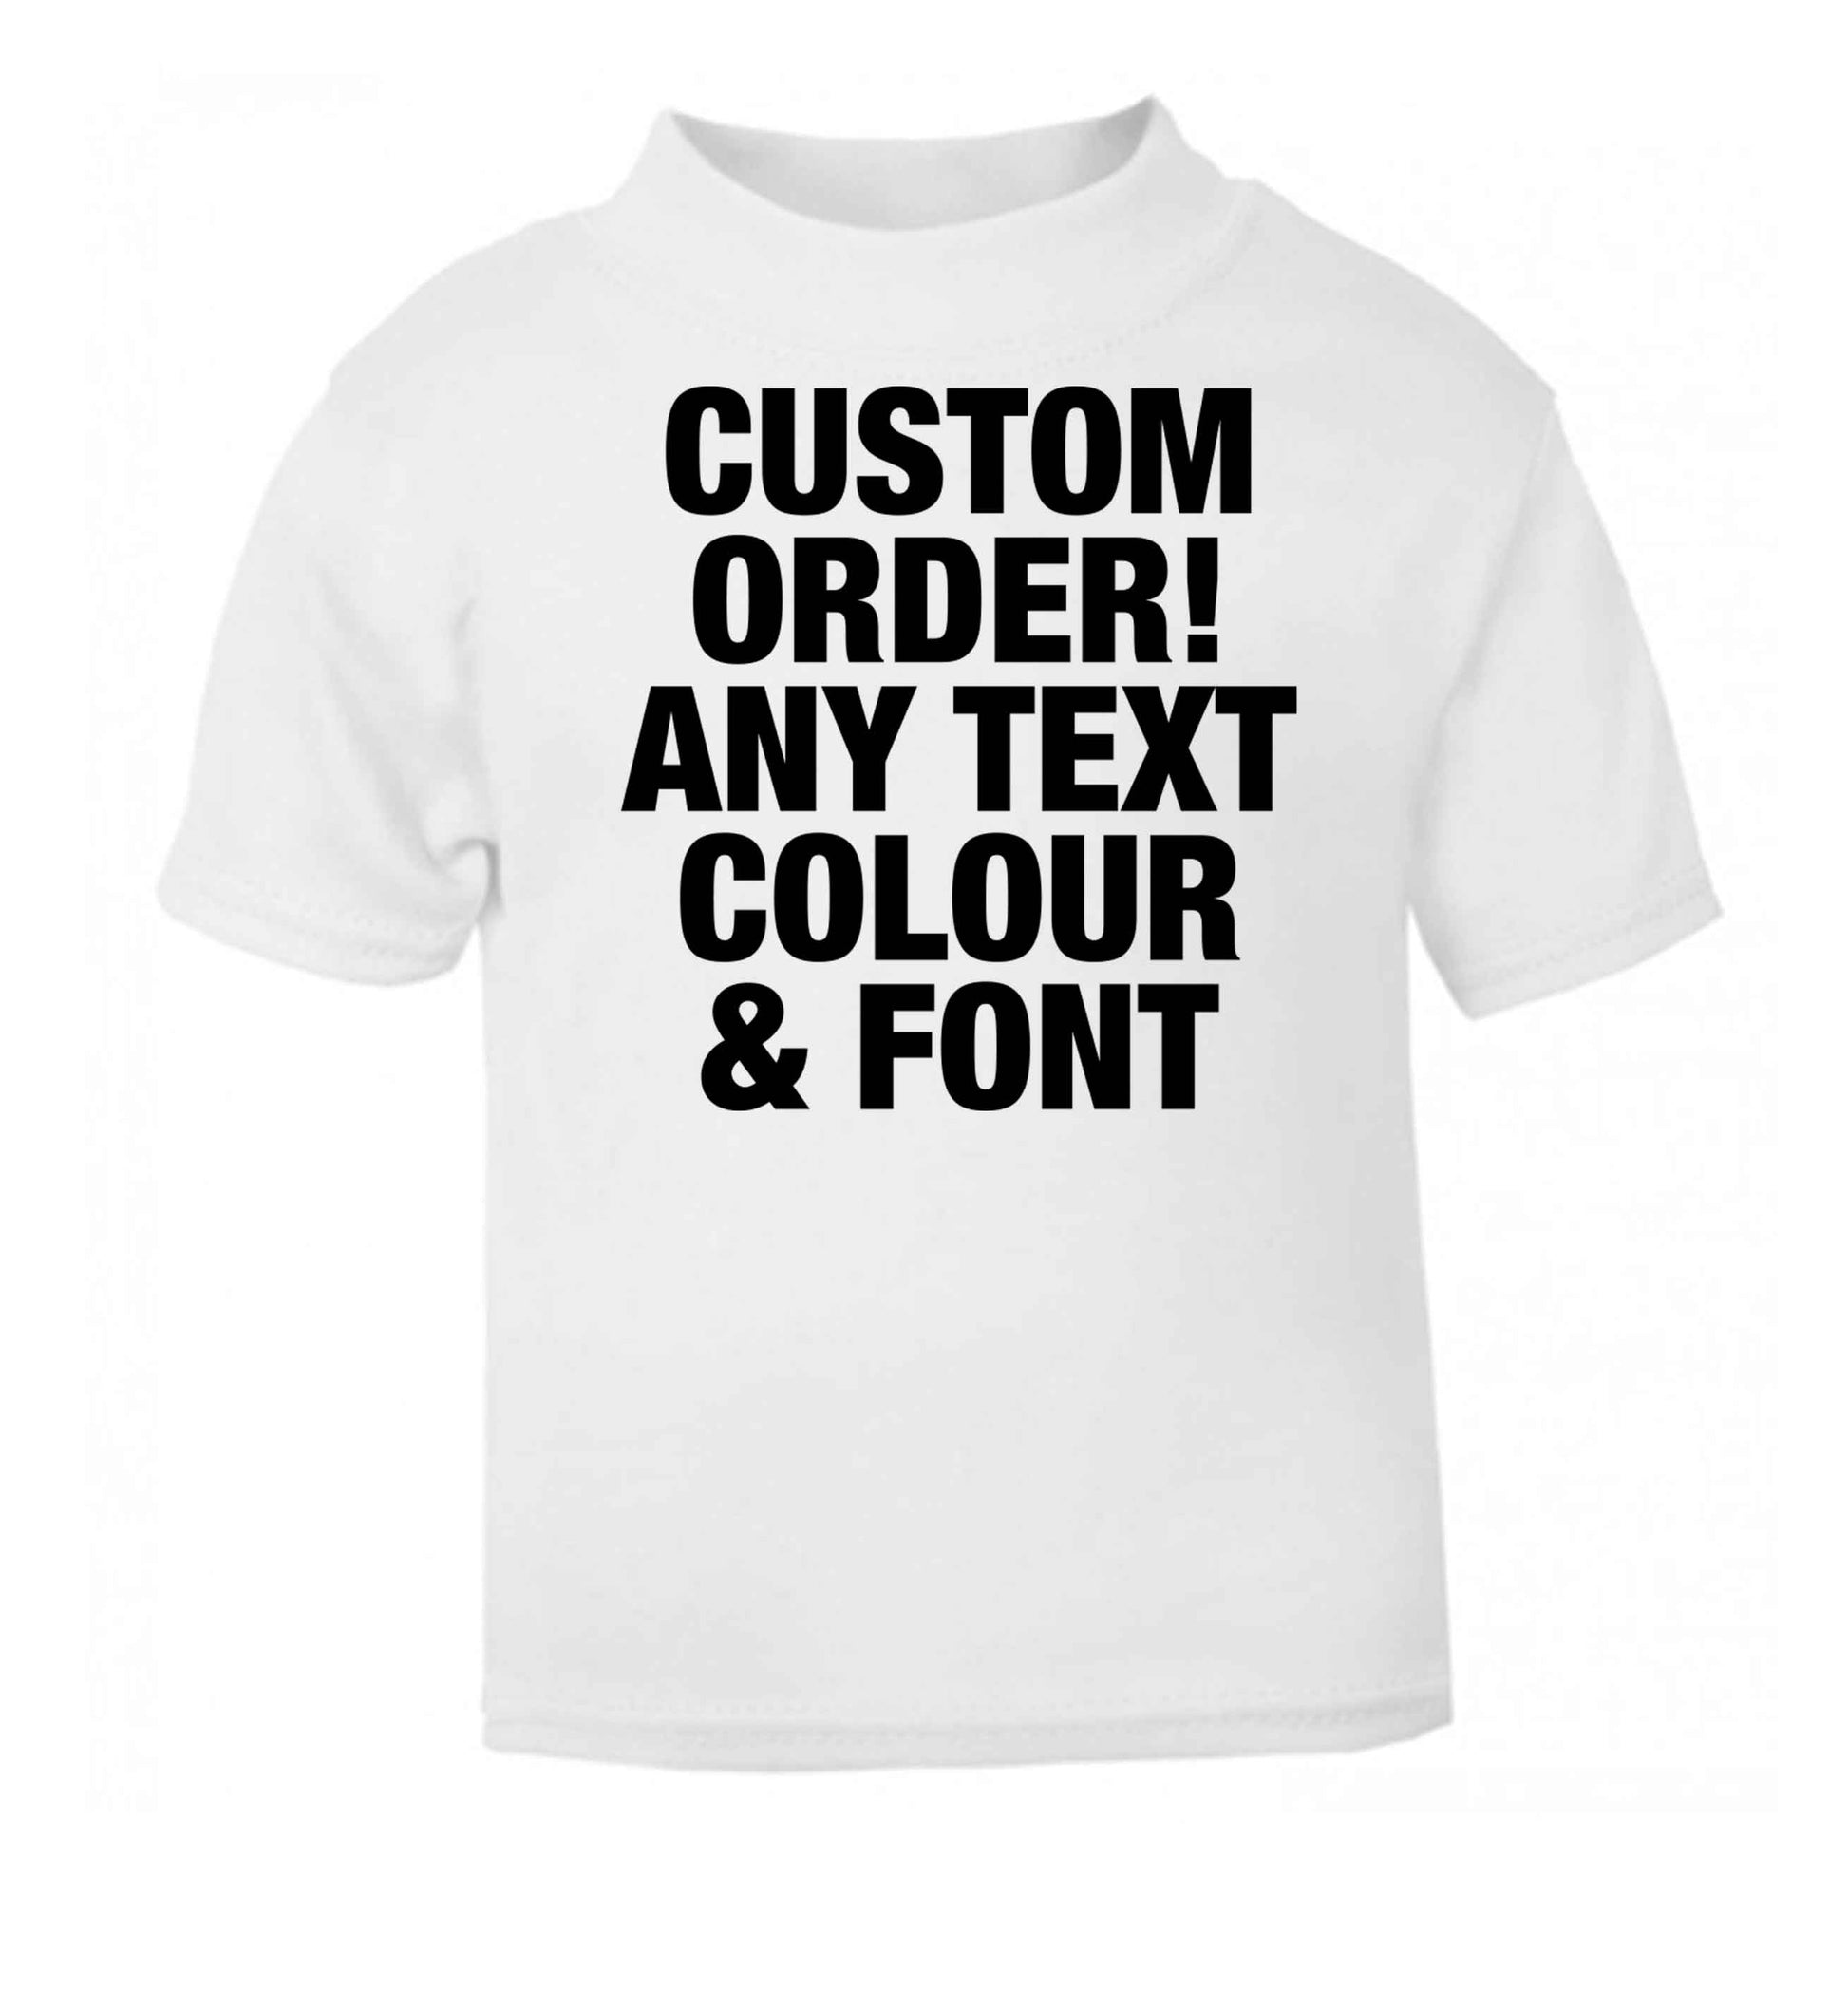 Custom order any text colour and font white baby toddler Tshirt 2 Years